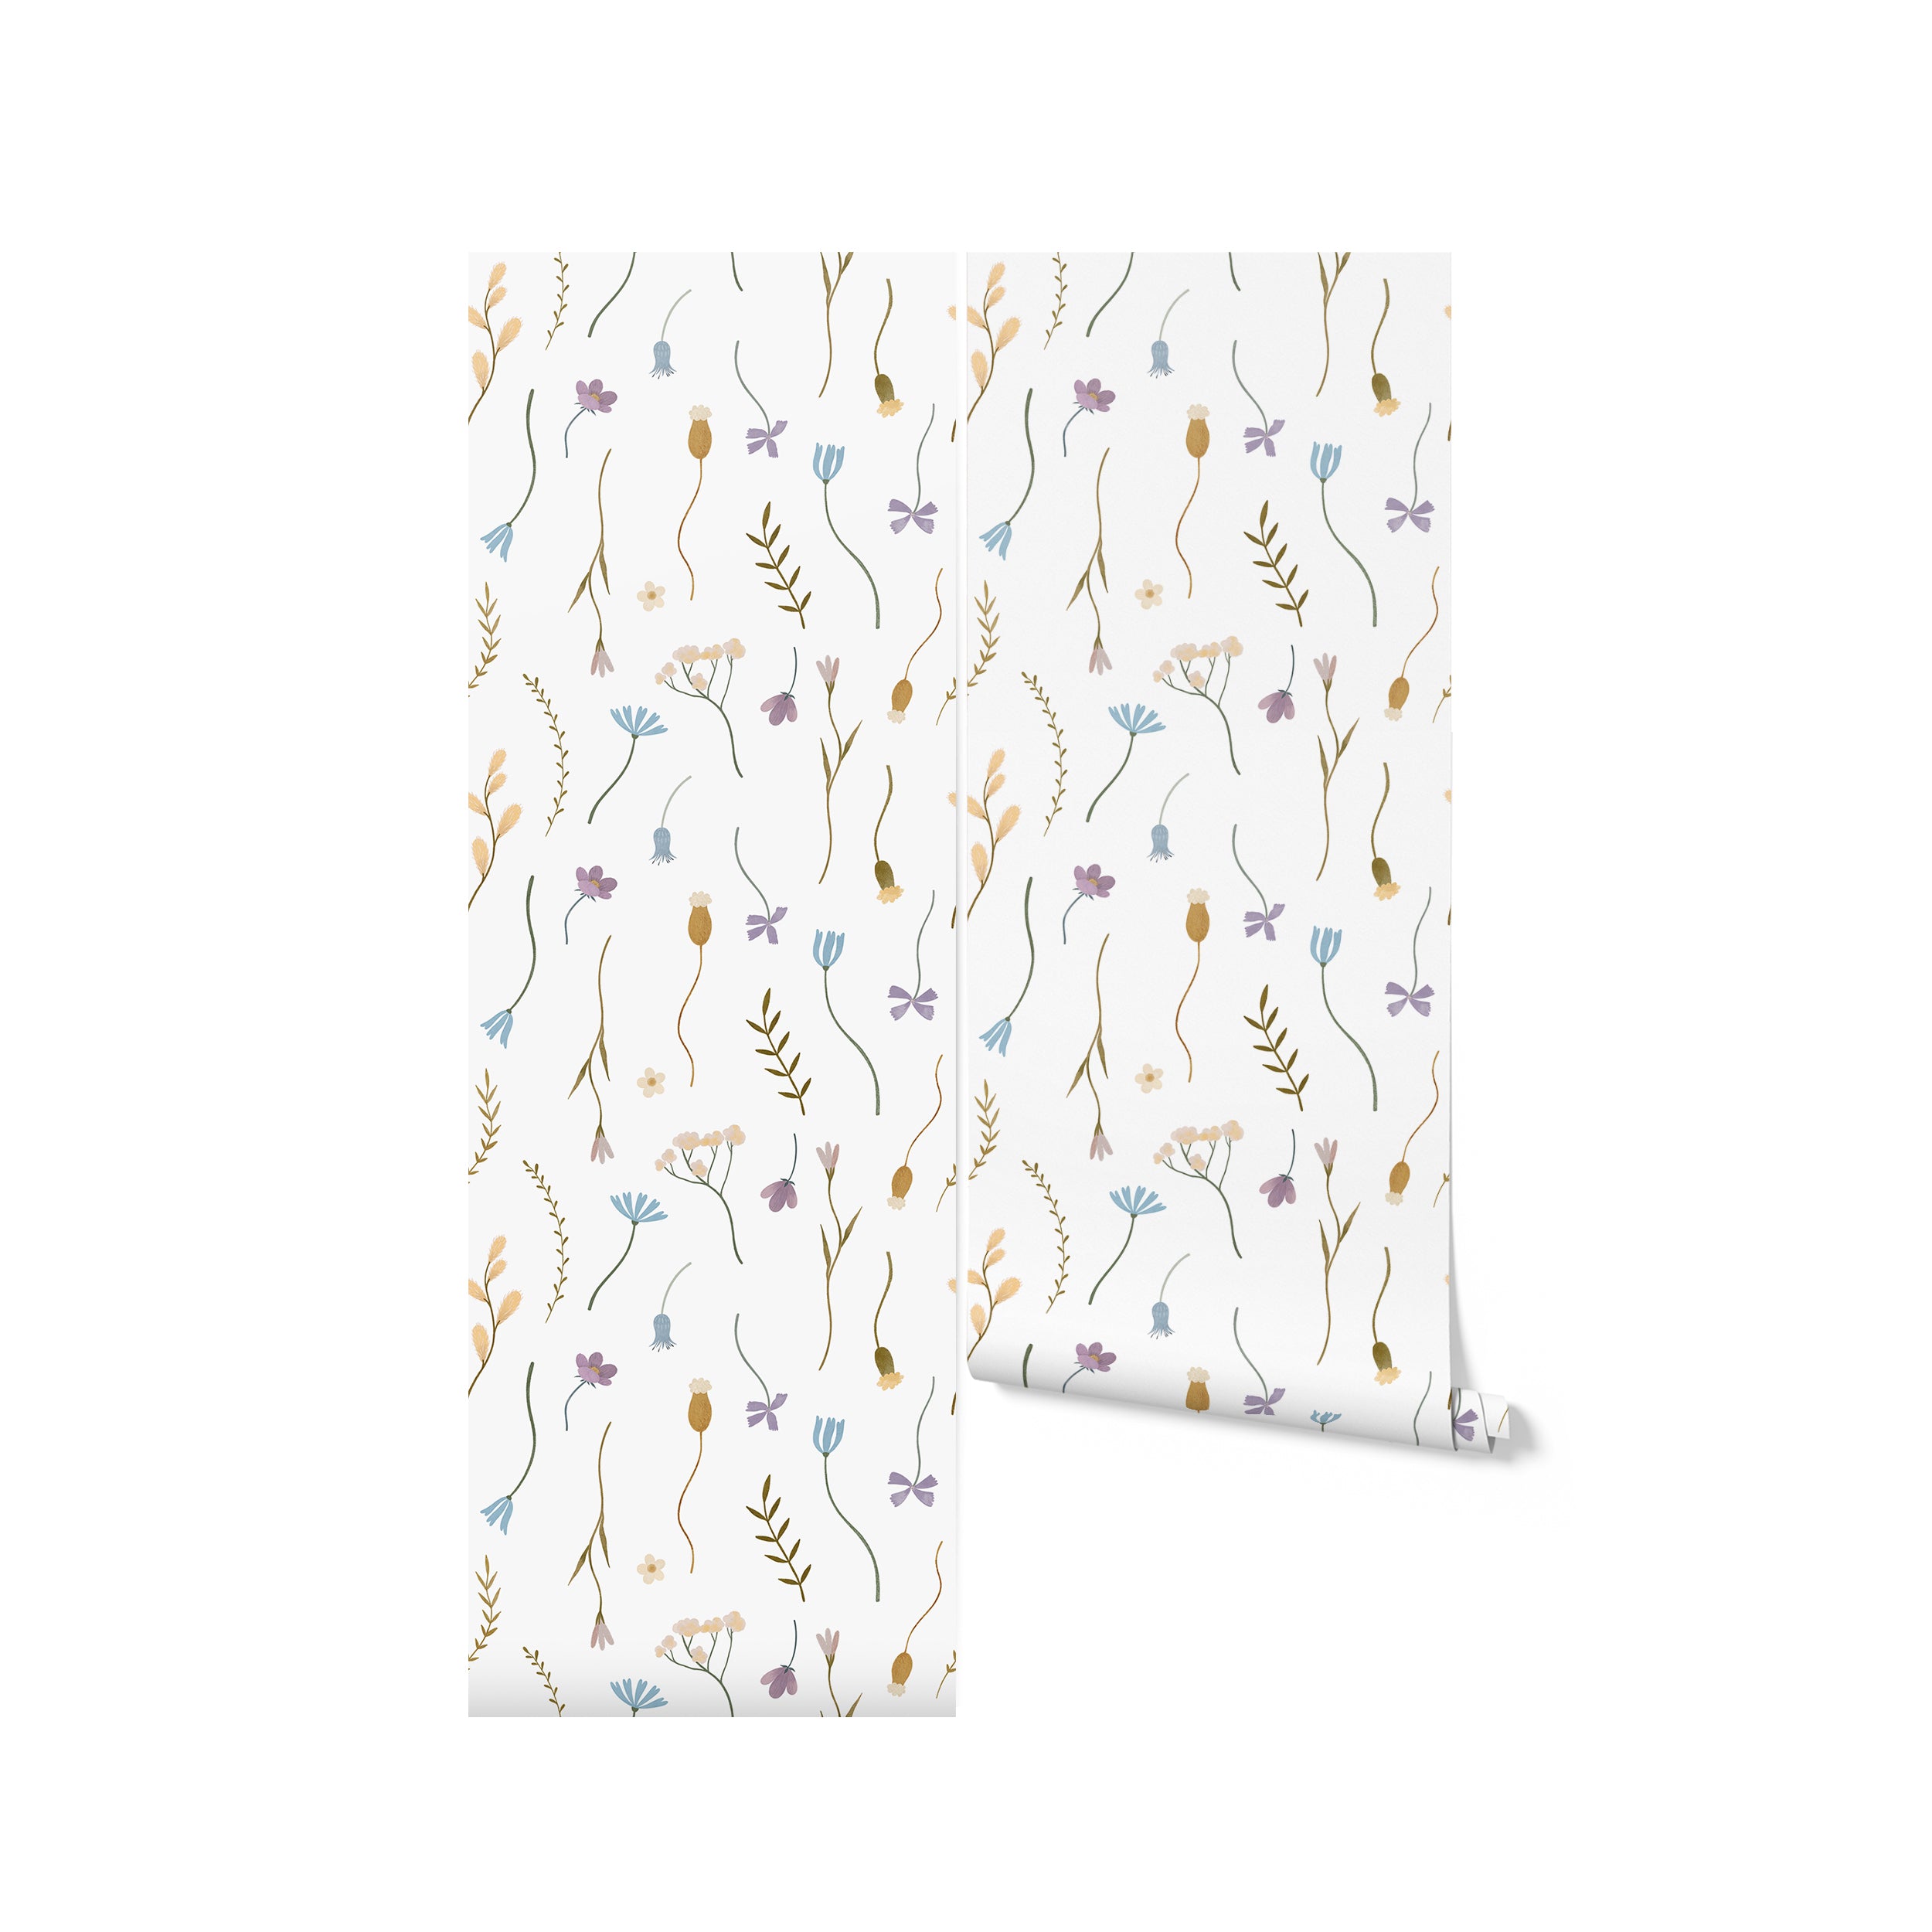 A roll of Minimal Paradise Wallpaper, displaying a charming array of pastel-colored botanical elements scattered across a white backdrop. This design infuses any space with a fresh, spring-like feel.